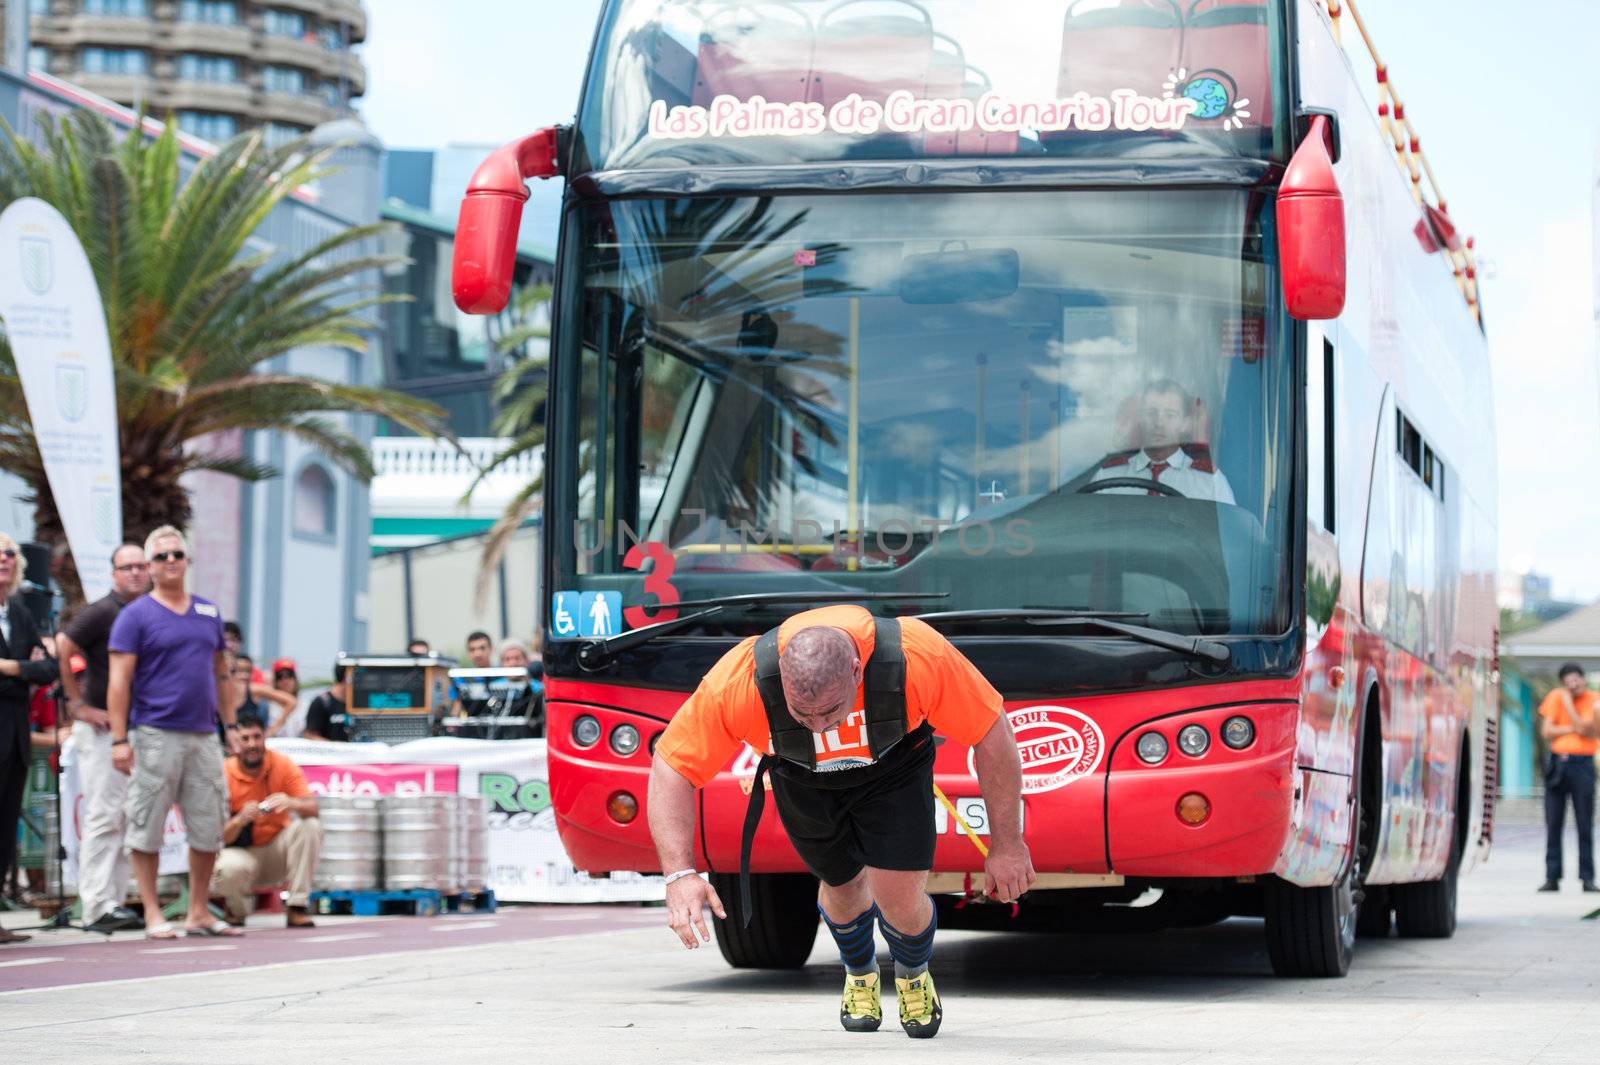 CANARY ISLANDS – SEPTEMBER 03: Ervin Katona from Serbia pulling a double-decker bus behind himself during Strongman Champions League in Las Palmas September 03, 2011 in Canary Islands, Spain